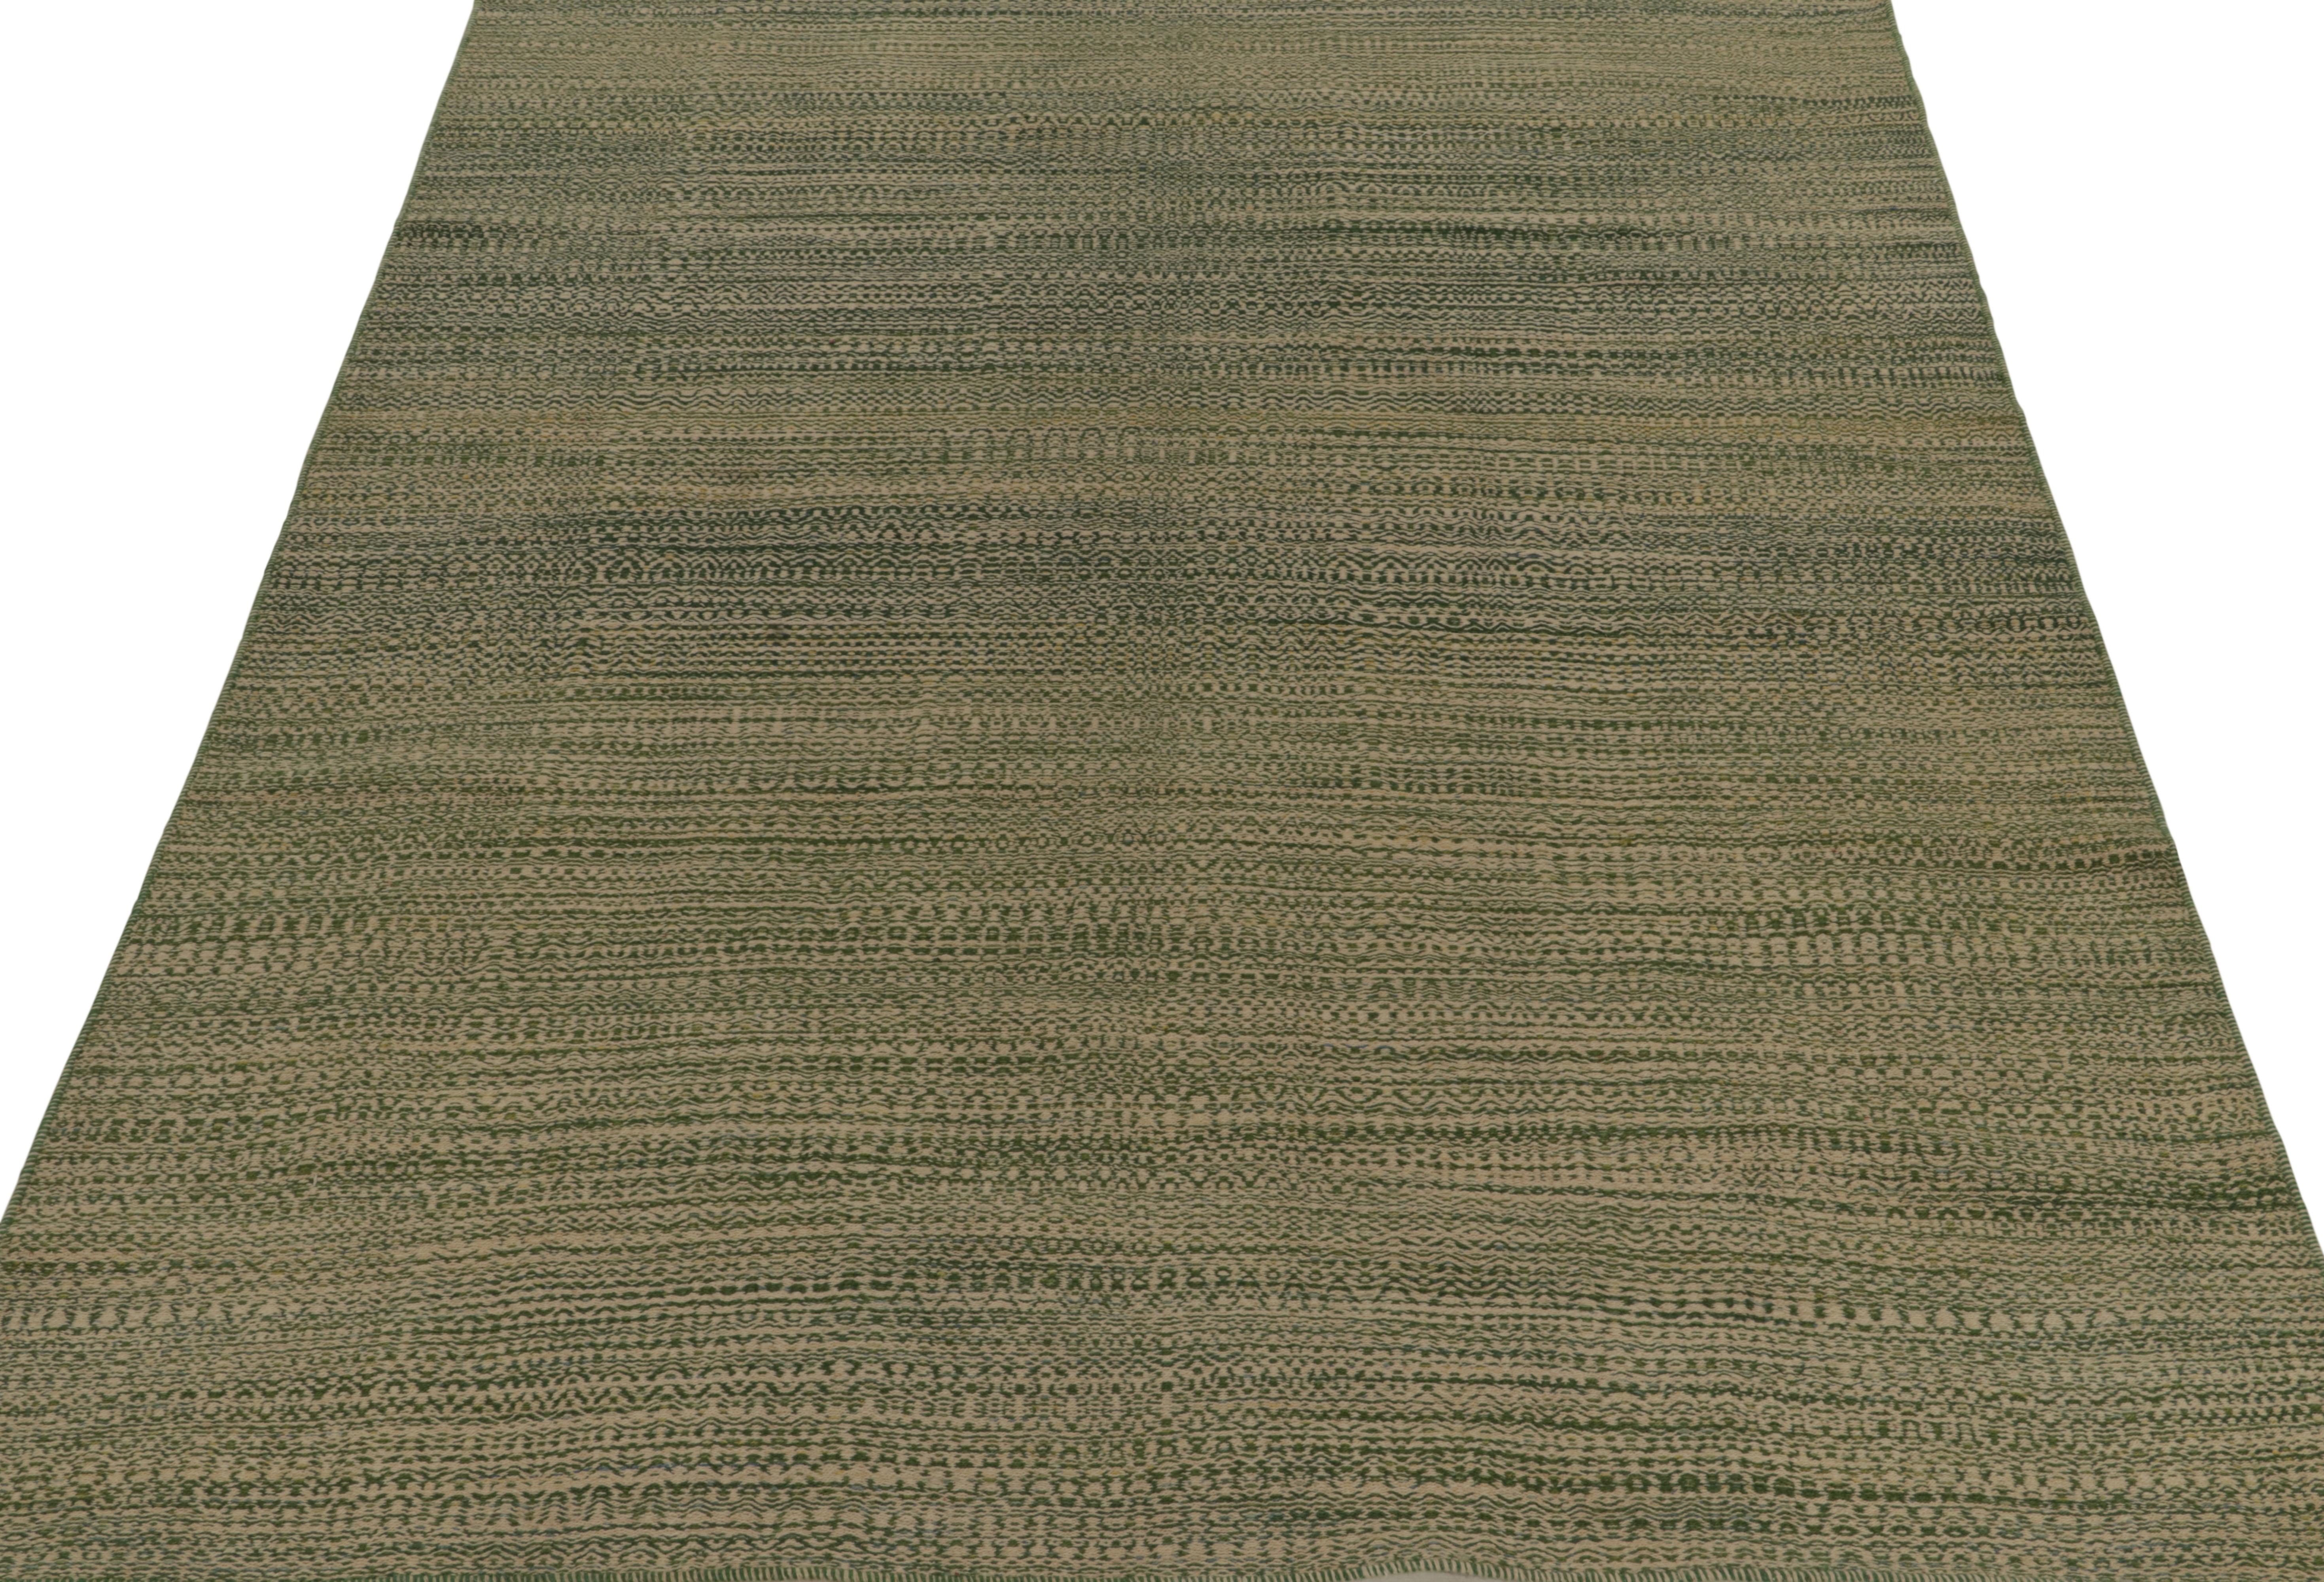 Afghan Rug & Kilim’s Contemporary Persian Kilim in Green and Beige Stripes For Sale